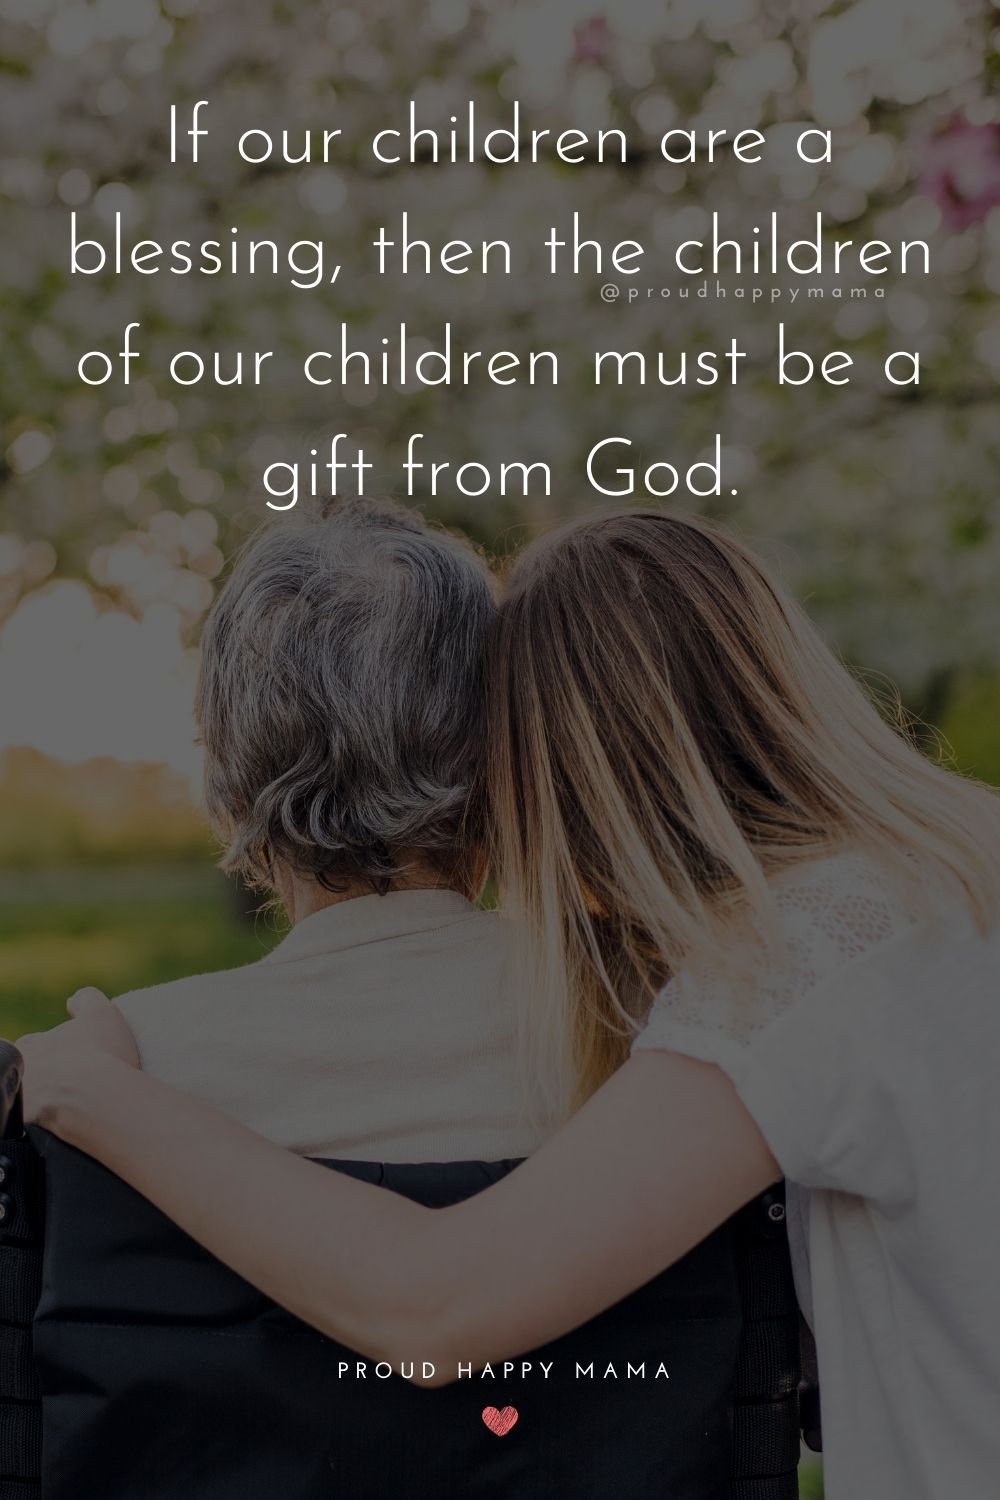 Grandparent Quotes About Grandchildren - If our children are a blessing, then the children of our children must be a gift from God.